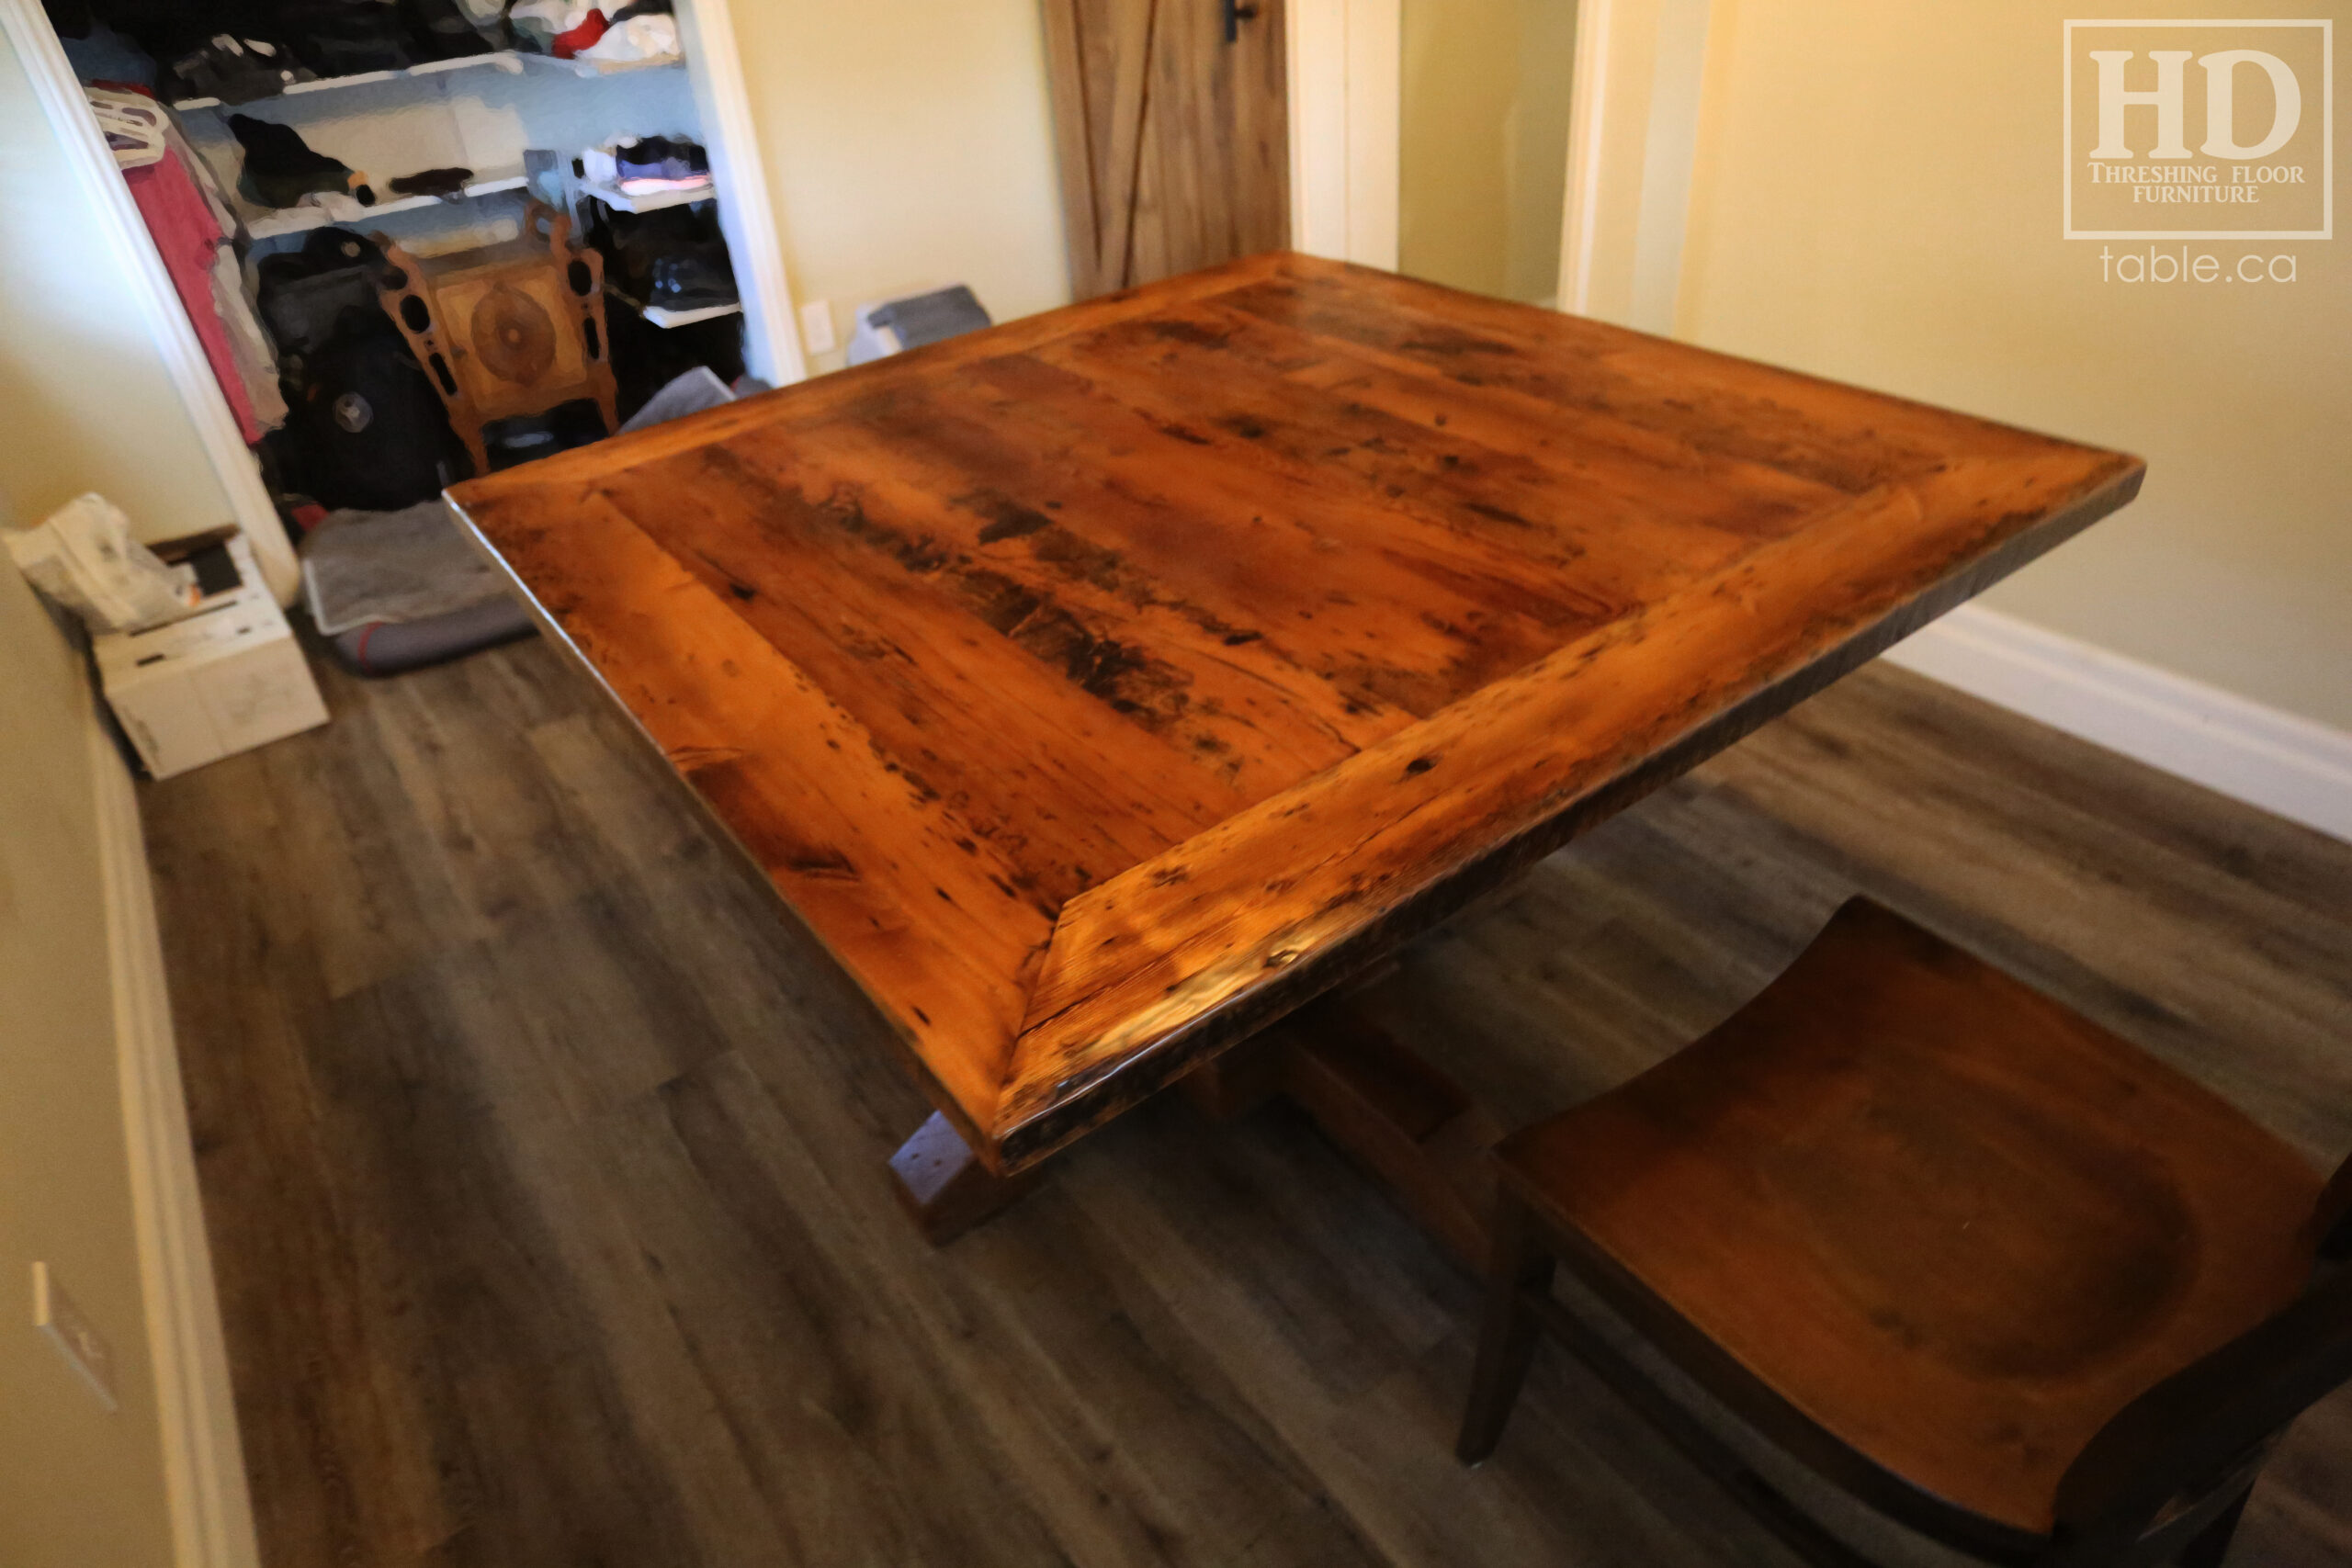 48" x 48" Ontario Barnwood Pedestal Table we made for a Windsor, Ontario home - Hand Hewn Post Base - Old Growth Hemlock Threshing Floor Top - Original edges & distressing maintained - Mitred Corners - Premium epoxy + satin polyurethane finish - [4] Athena Chairs / Wormy Maple - www.table.ca